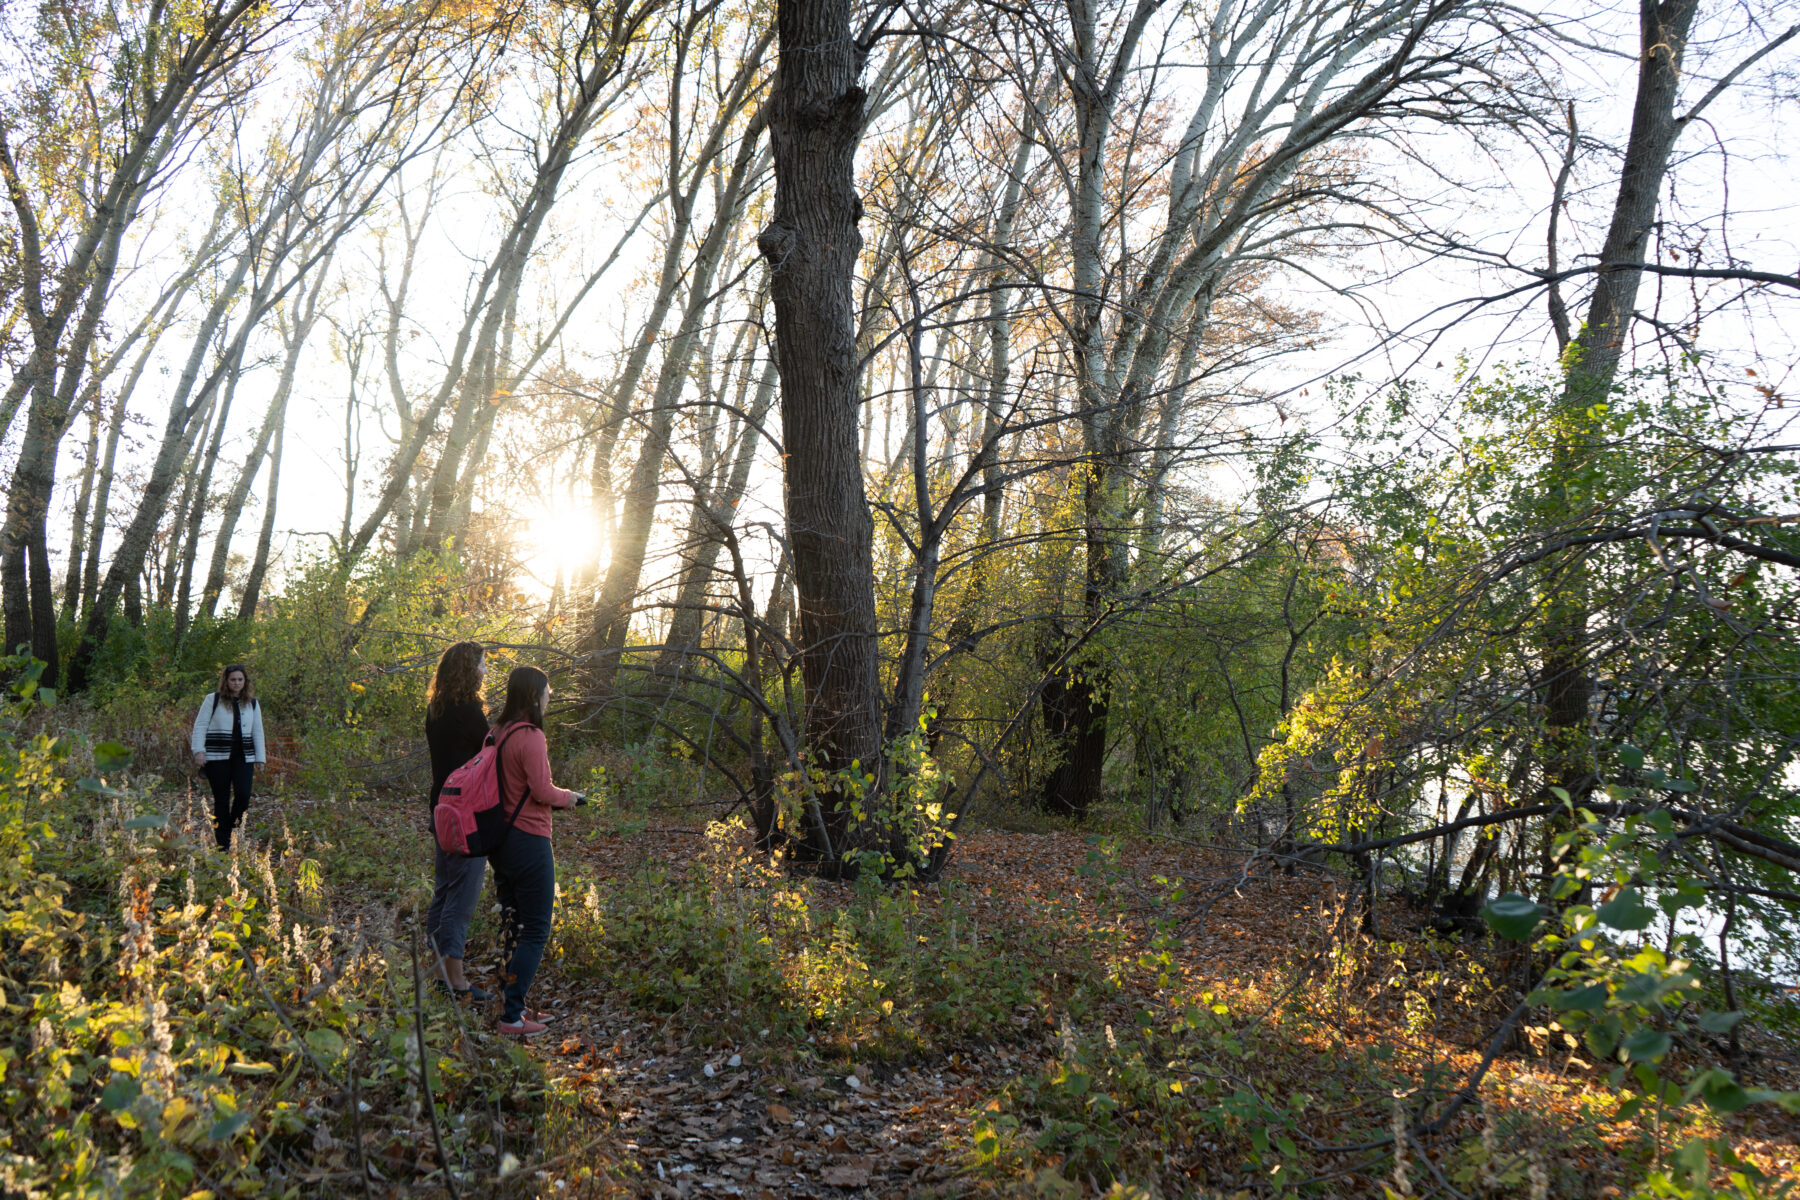 people walking through a wooded area along the lake's edge